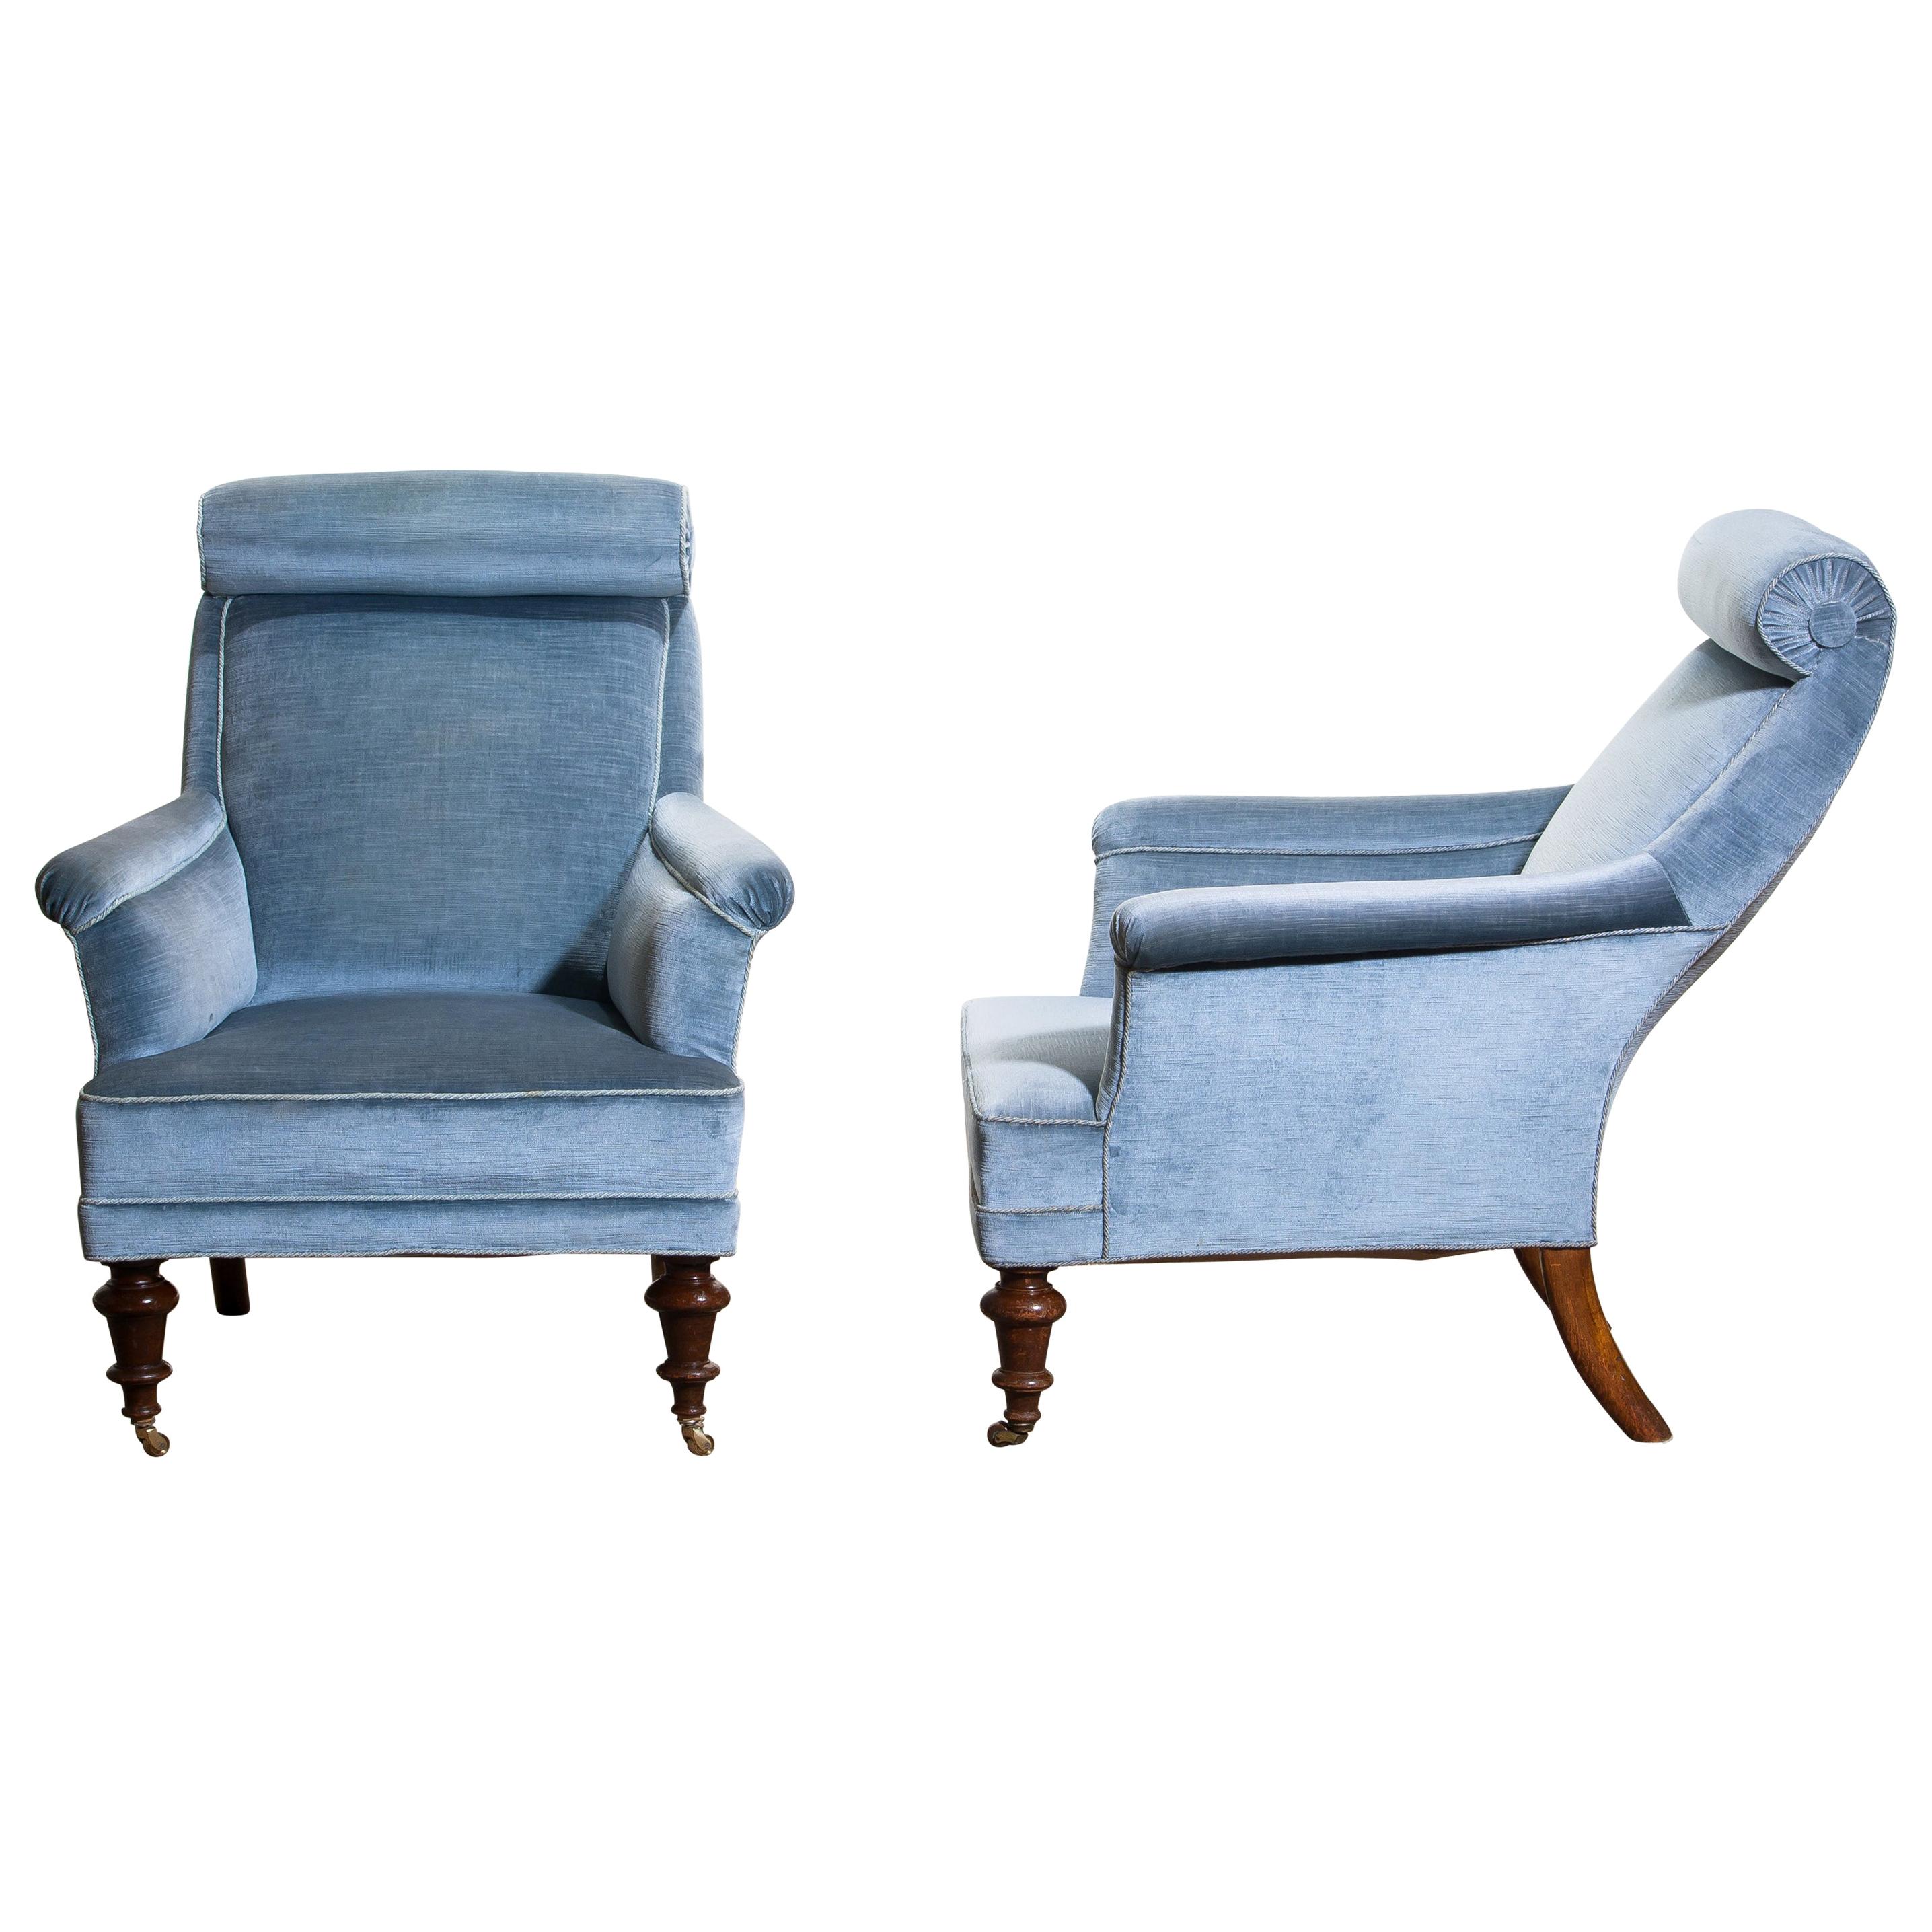 Rare and extremely comfortable / beautiful set of two bergère / lounge chairs in Dorothy Draper style from the turn to the 20th century.
Both chairs are upholstered in ice blue velvet and in good condition.

One chair has new wheels in brass and